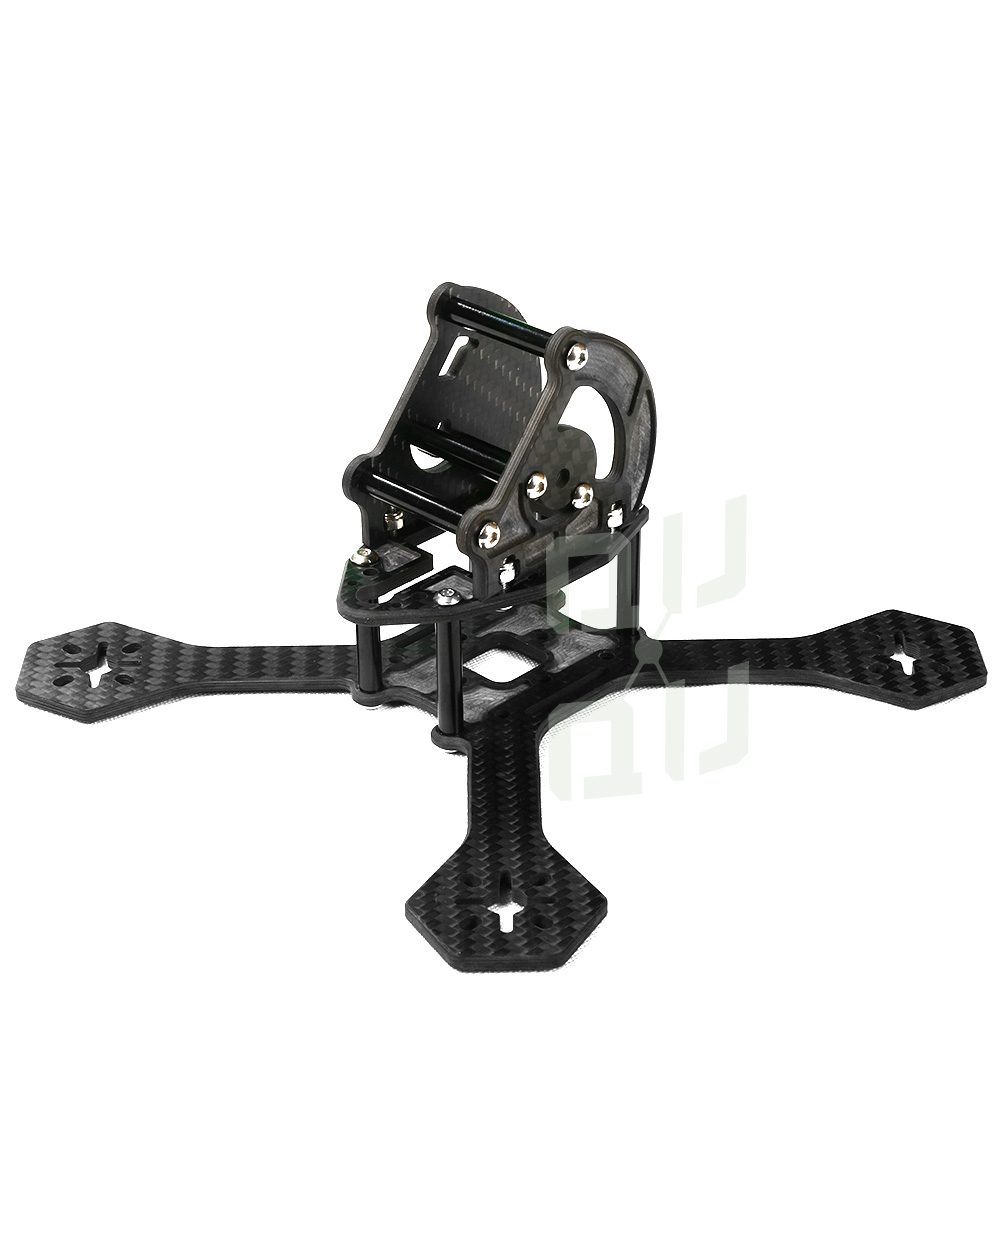 QQ166 4" Racing Drone X-style frame available from QuadQuestions.com rear right side